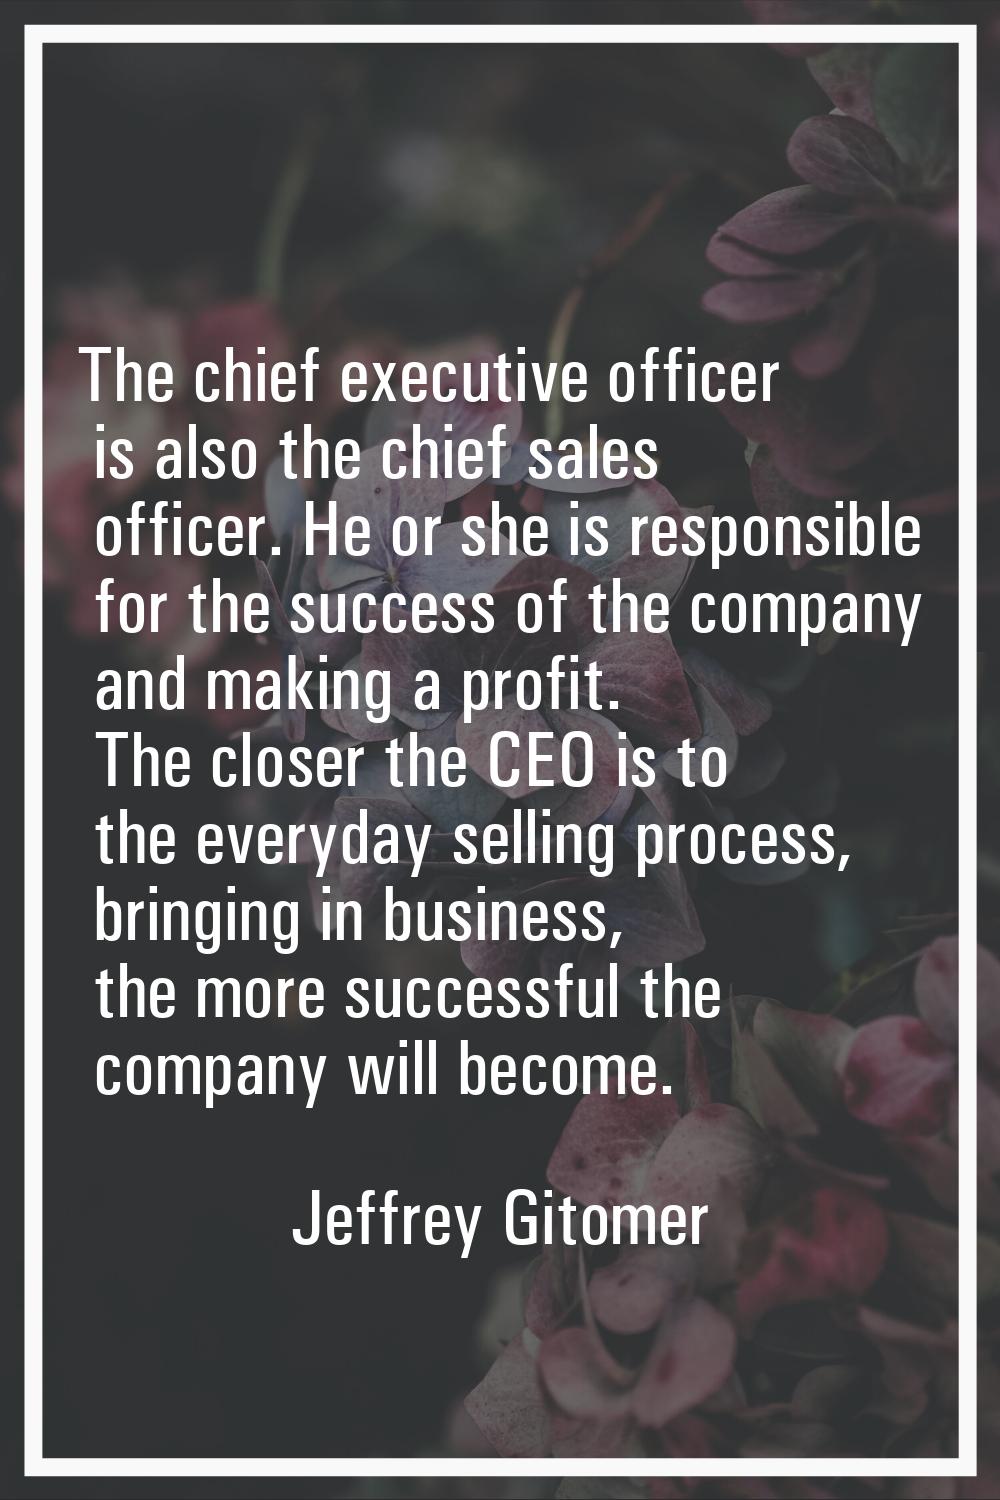 The chief executive officer is also the chief sales officer. He or she is responsible for the succe